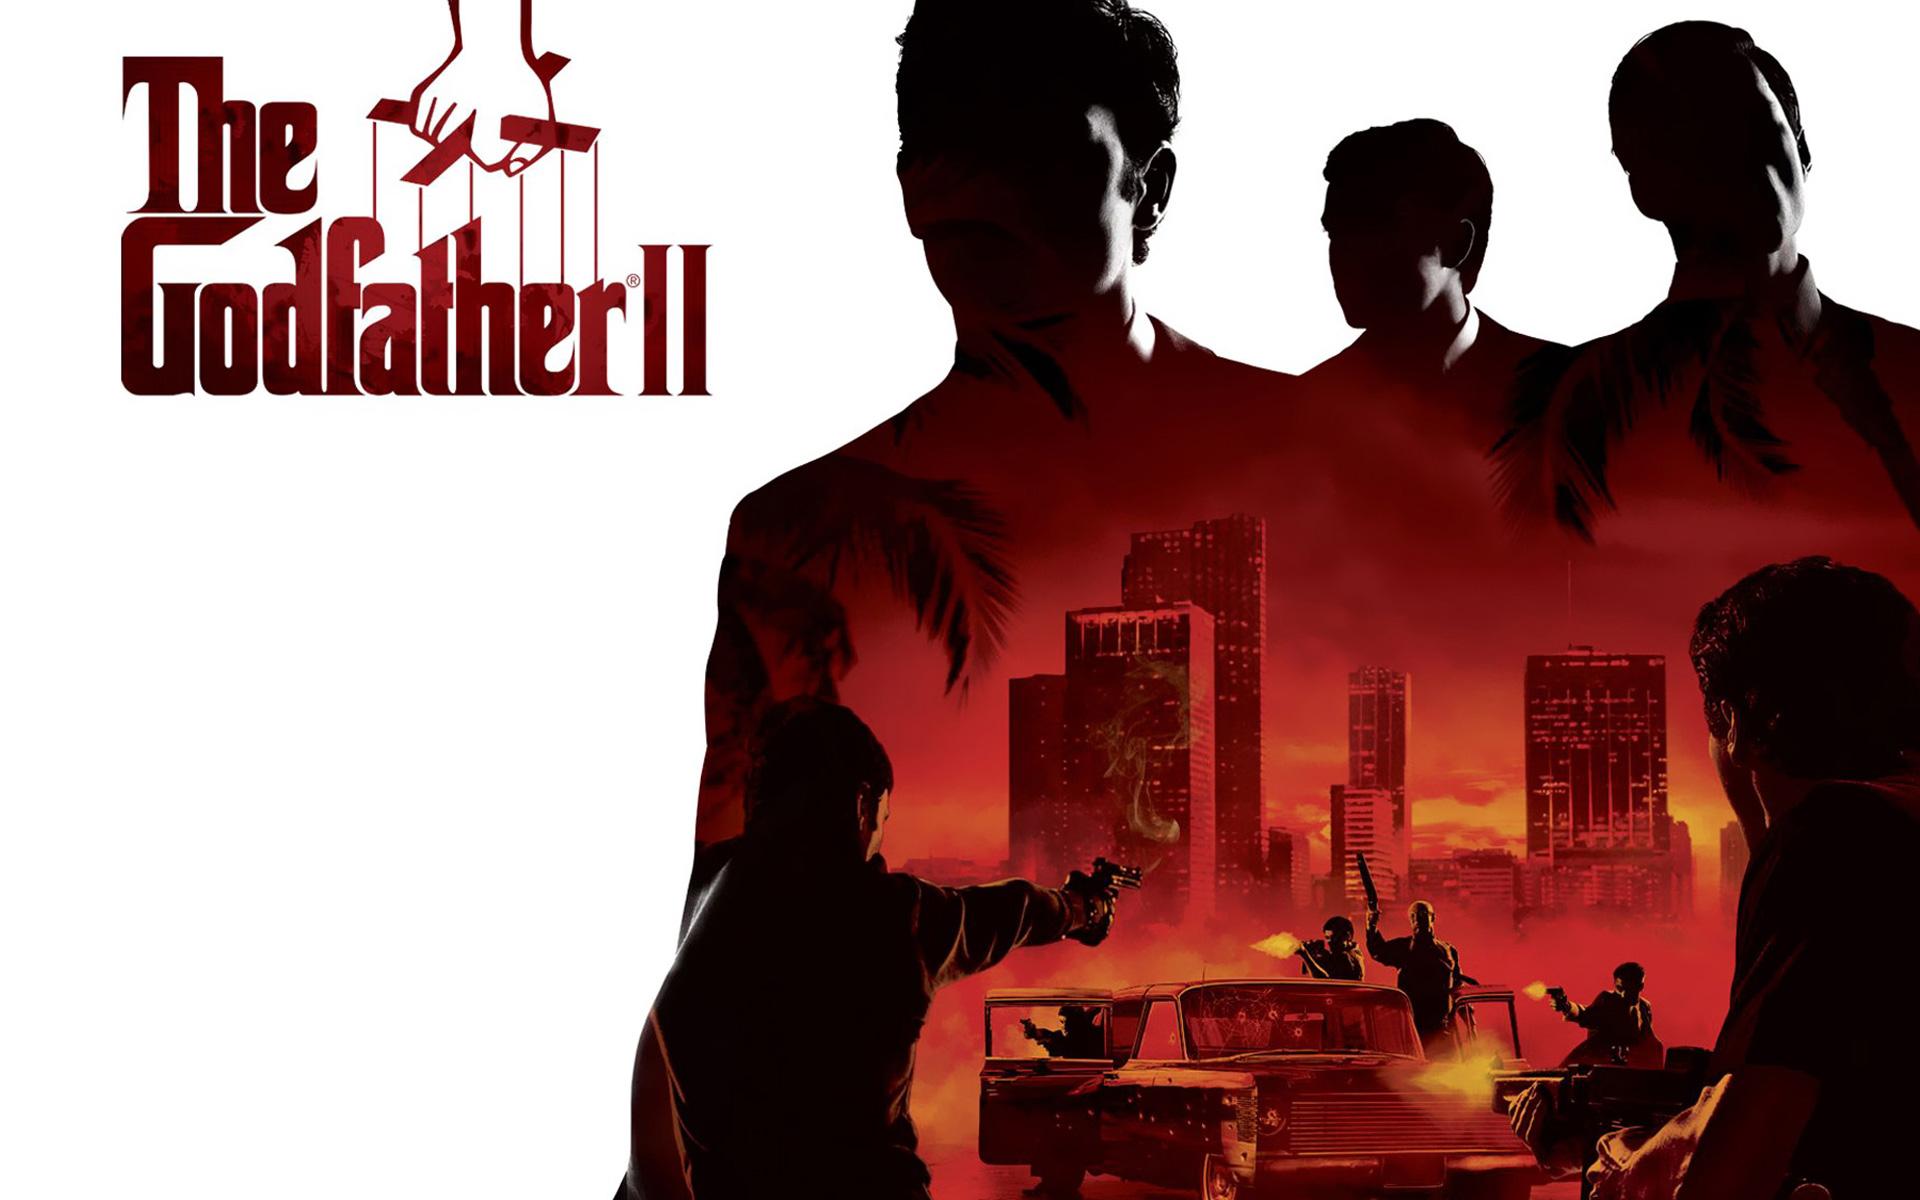 The Godfather II Wallpaper. The Godfather